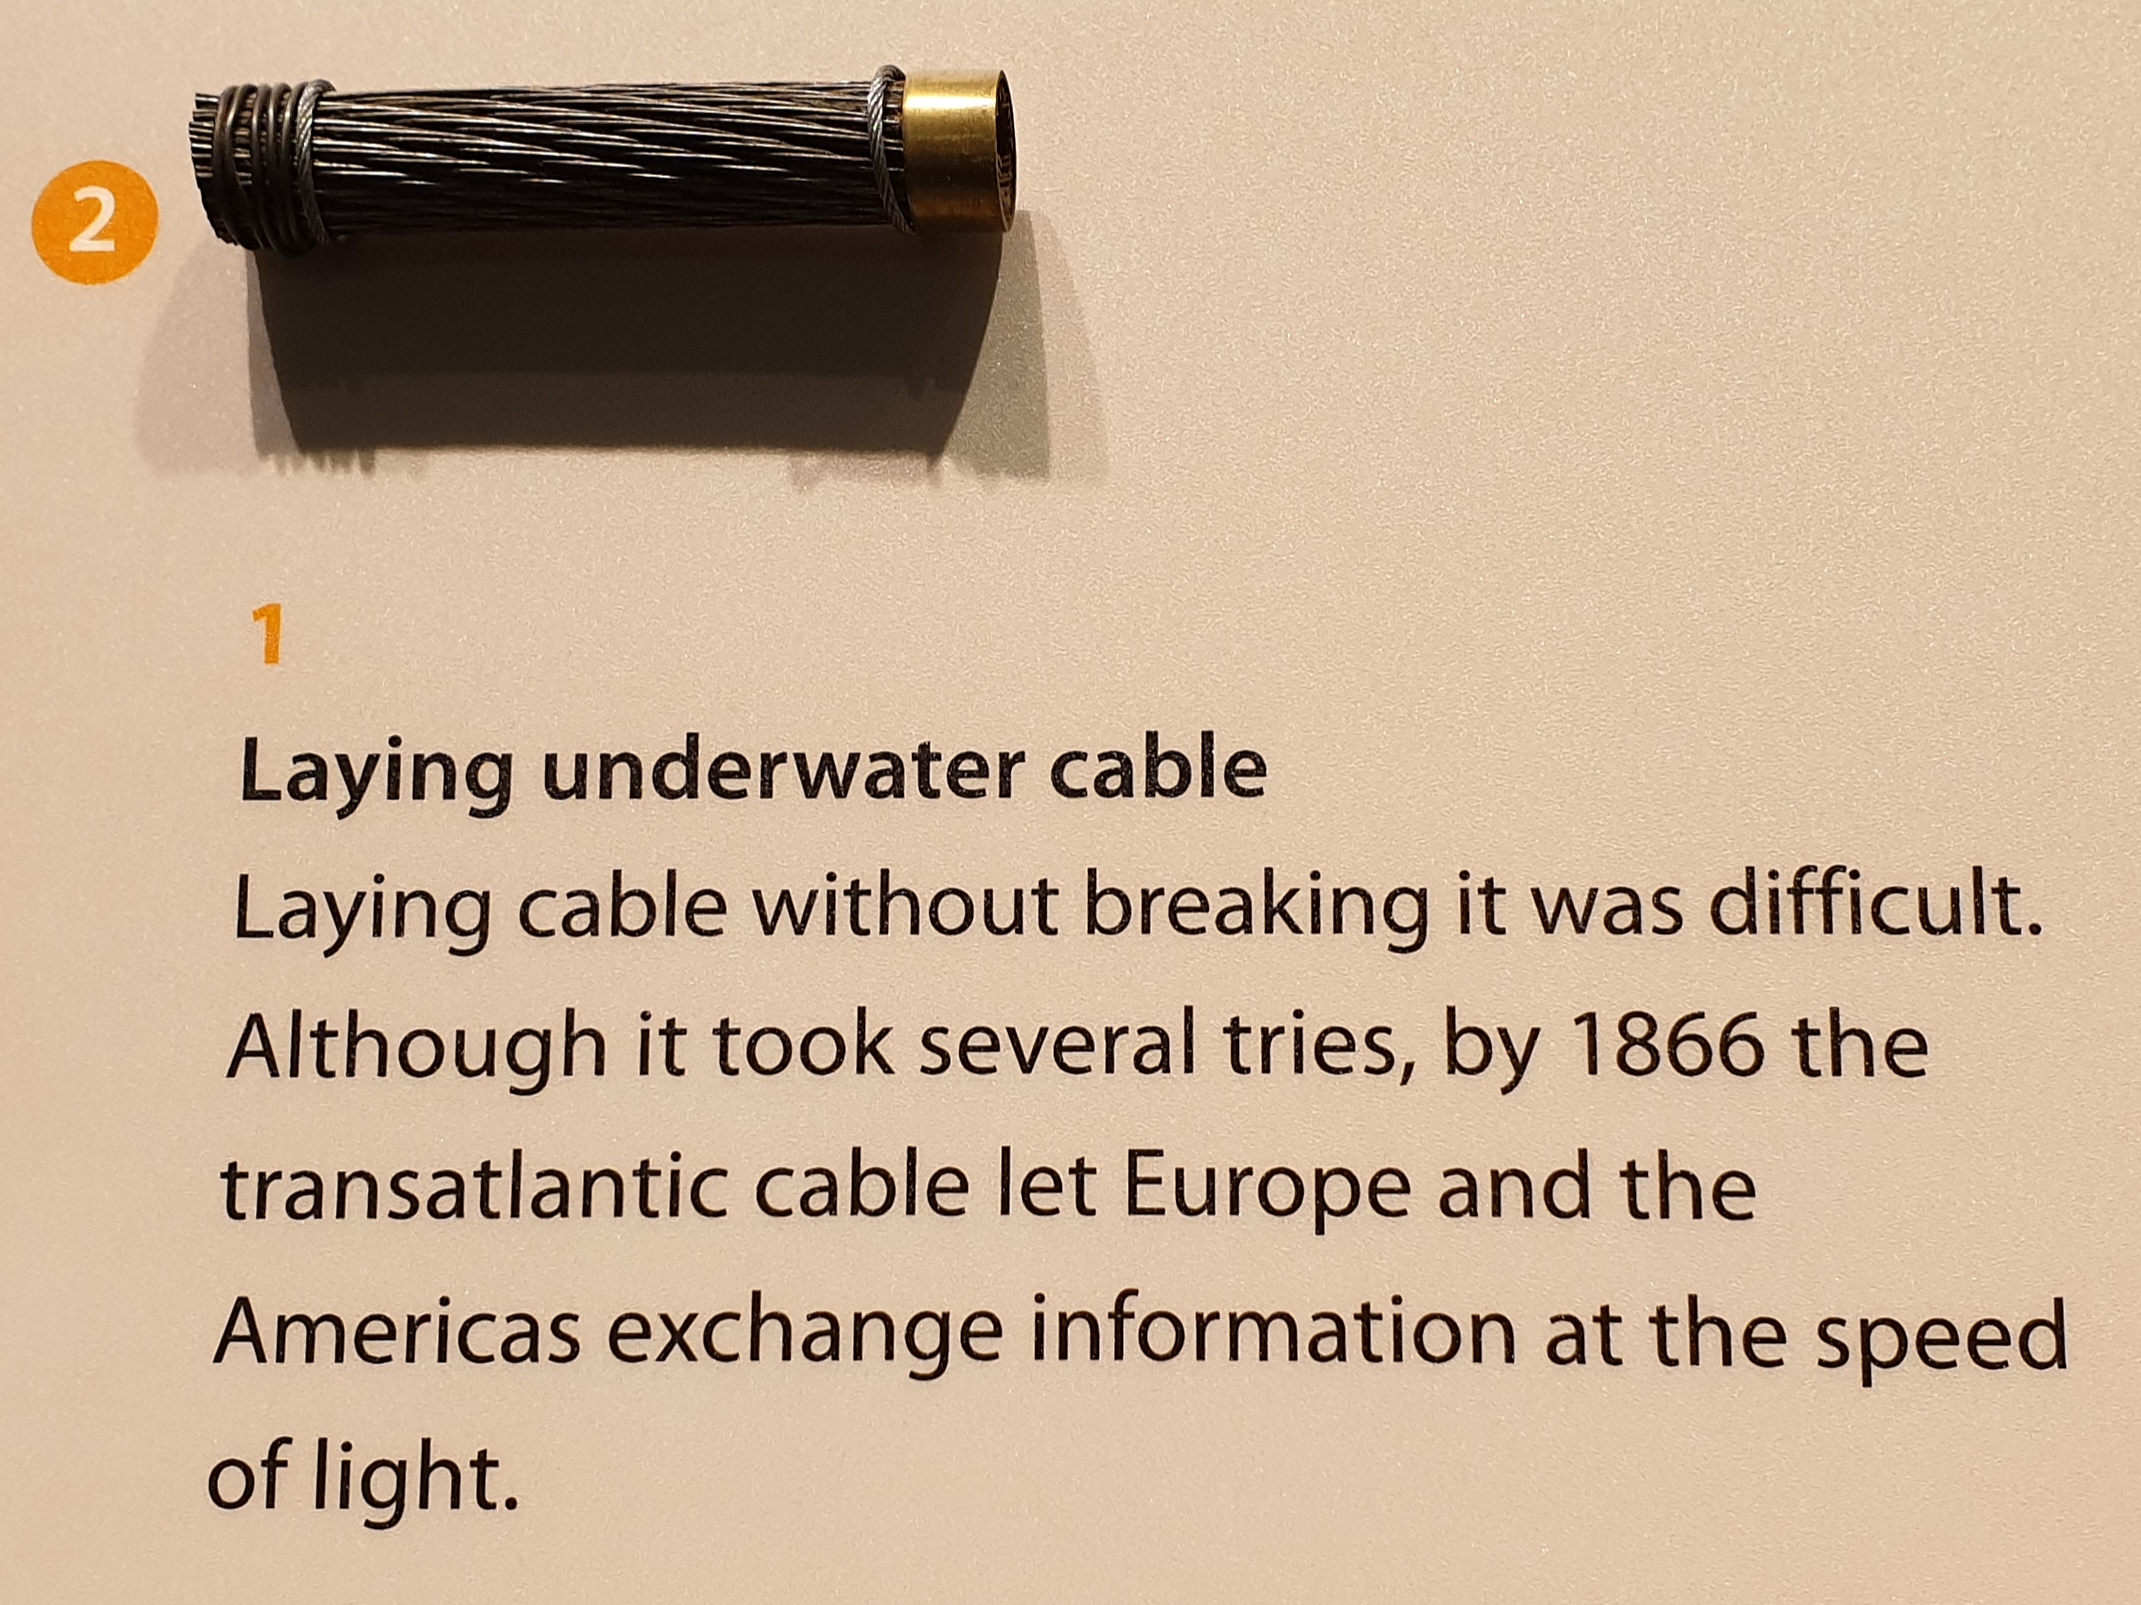 Exhibit of early transatlantic telegraph cable with message implying that it enabled "speed of light" communications.